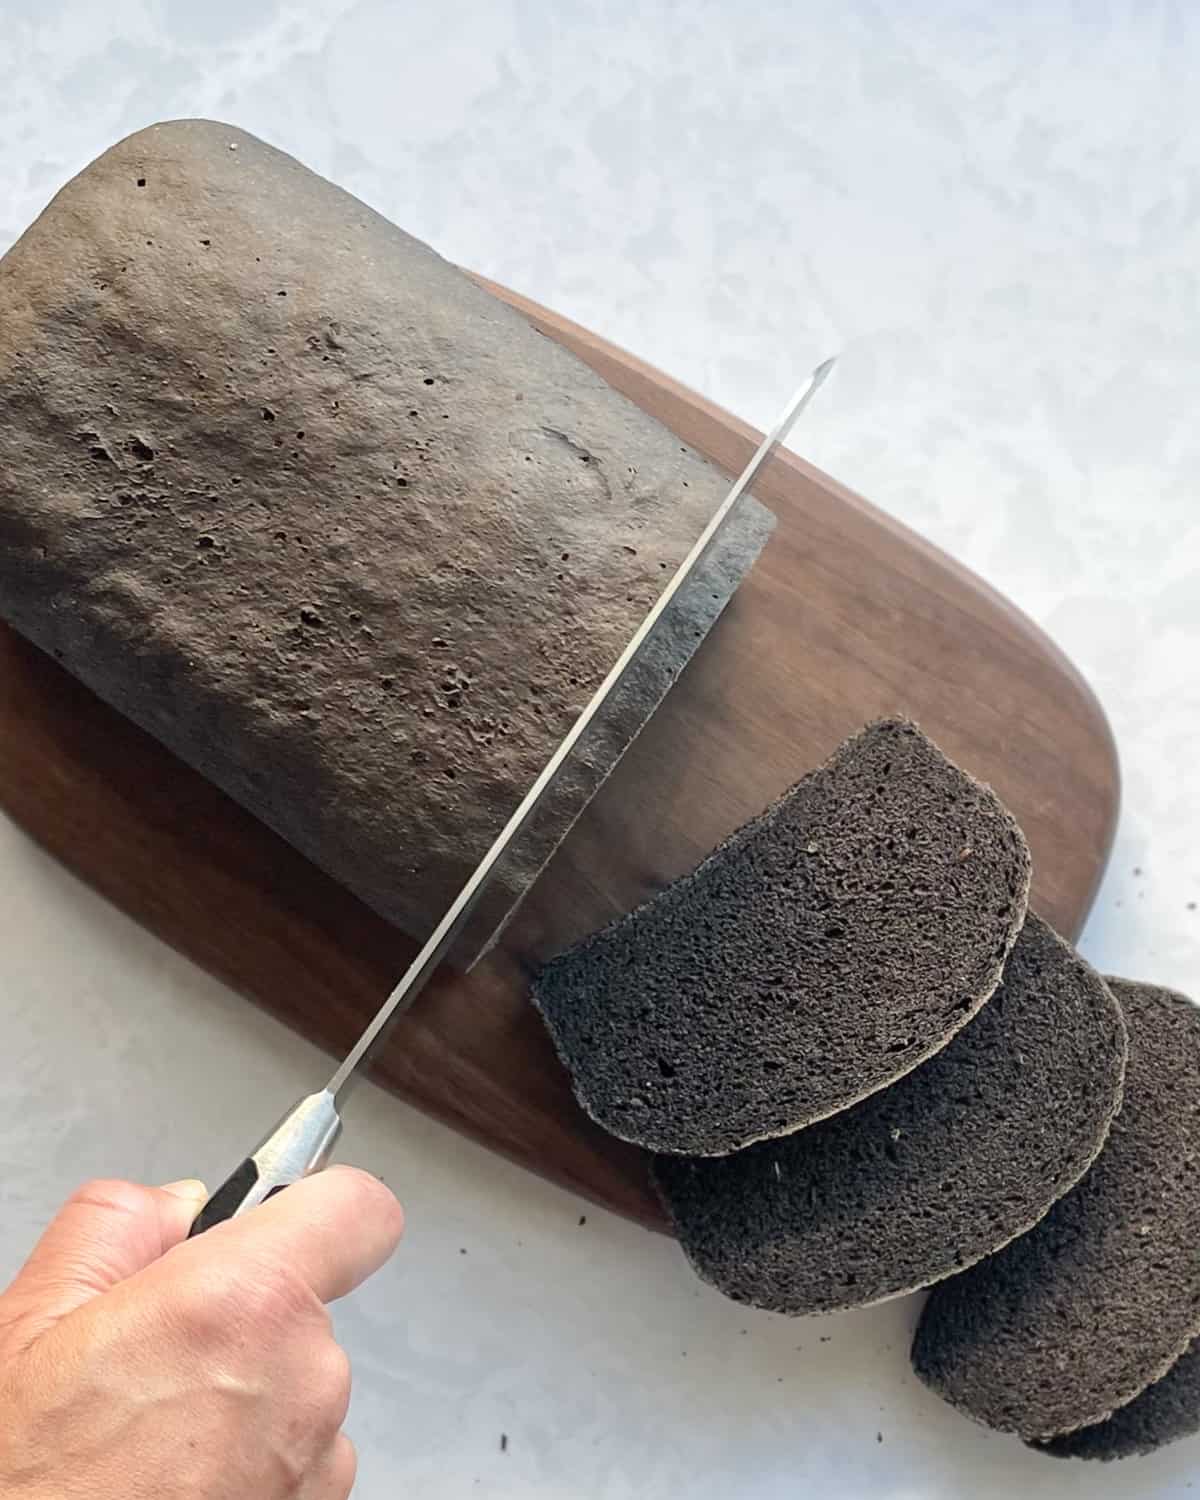 loaf of black russian rye bread being sliced into slices.